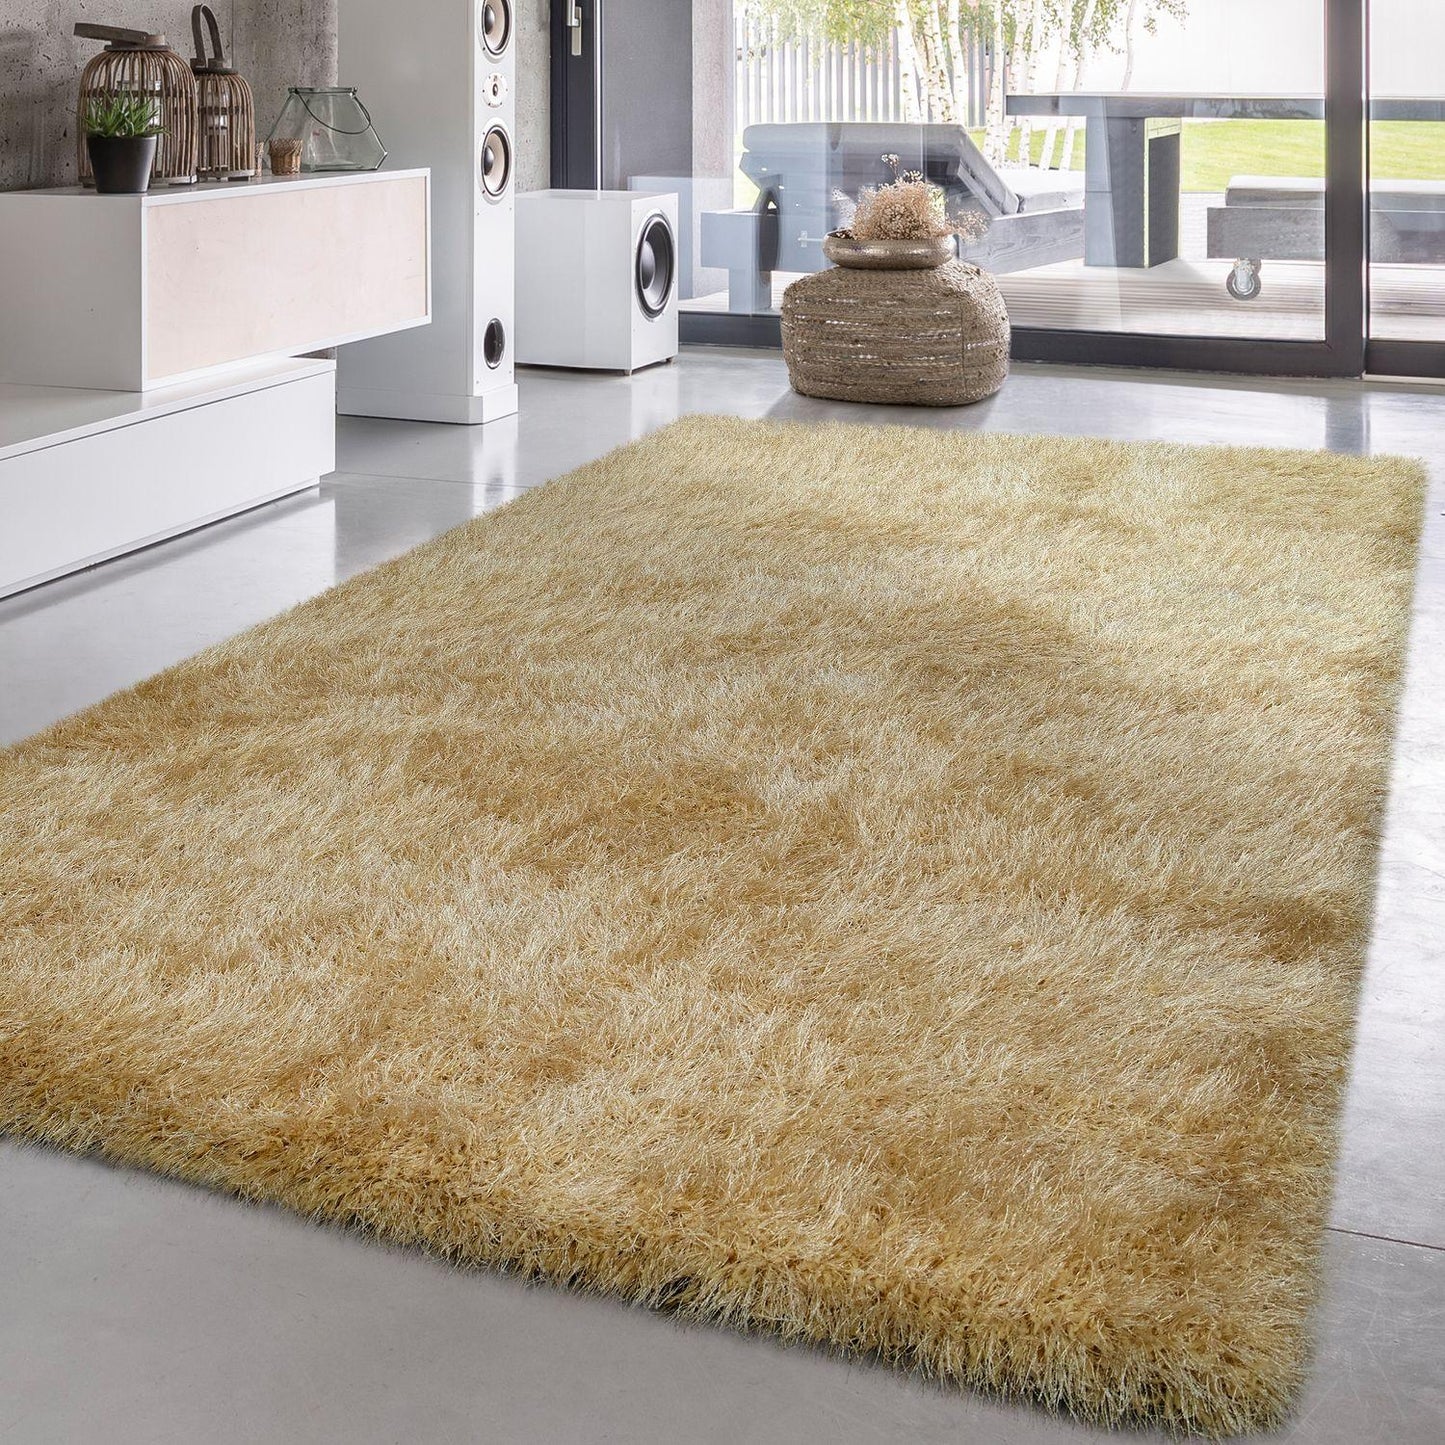  Paco Home Shag Rug High Pile in Grey for Bedroom & Living Room  Fluffy Glossy Pastel Yarn, Size: 6'7 x 9'6 : Home & Kitchen